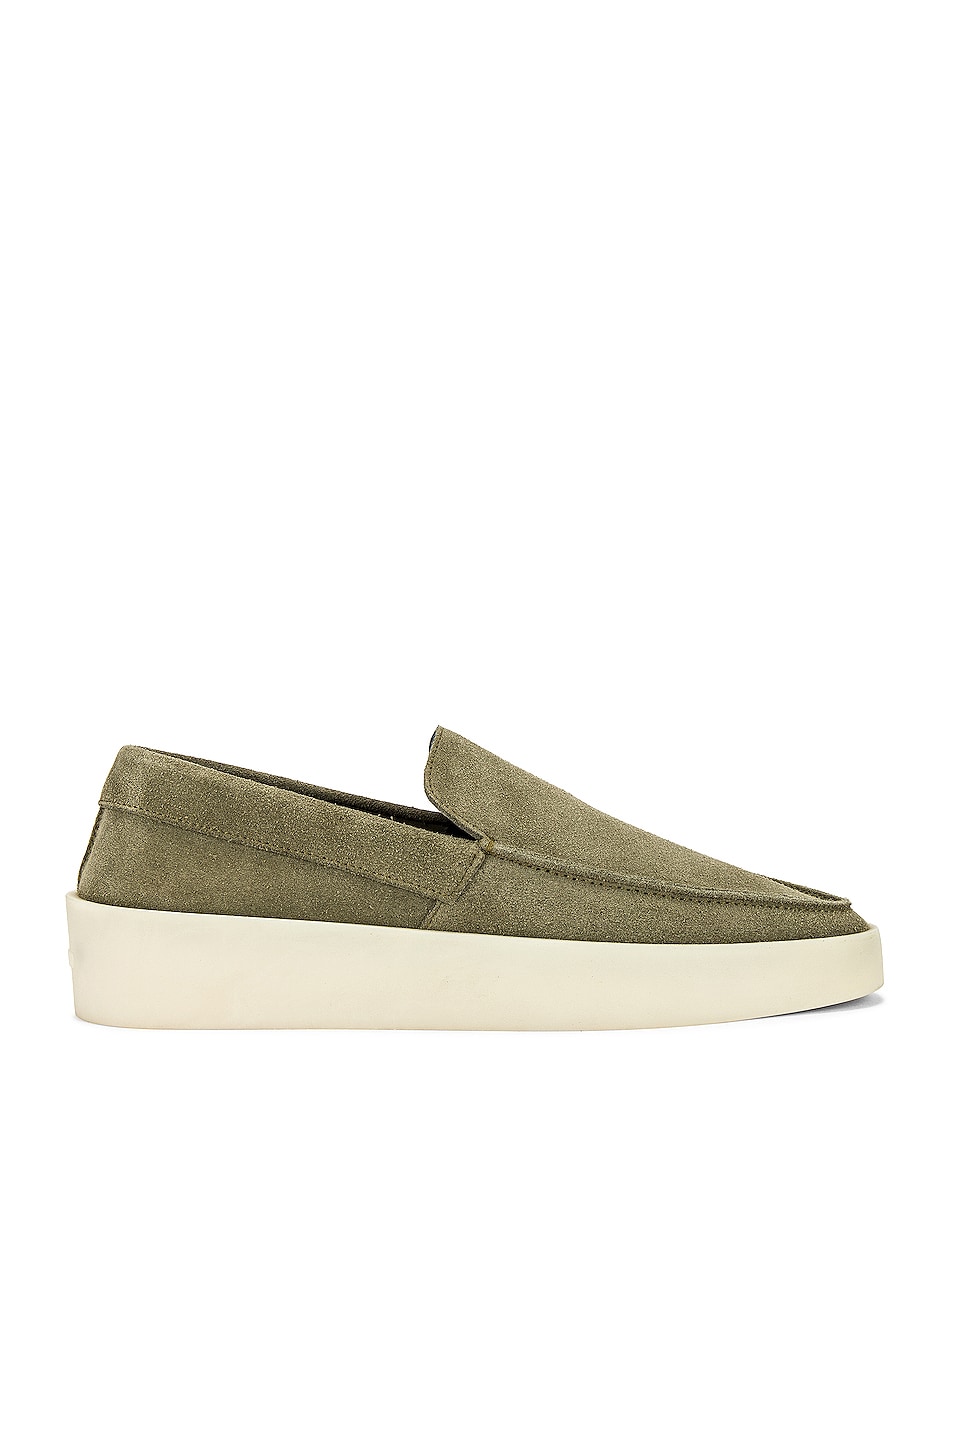 Image 1 of Fear of God The Loafer in Hunter Green